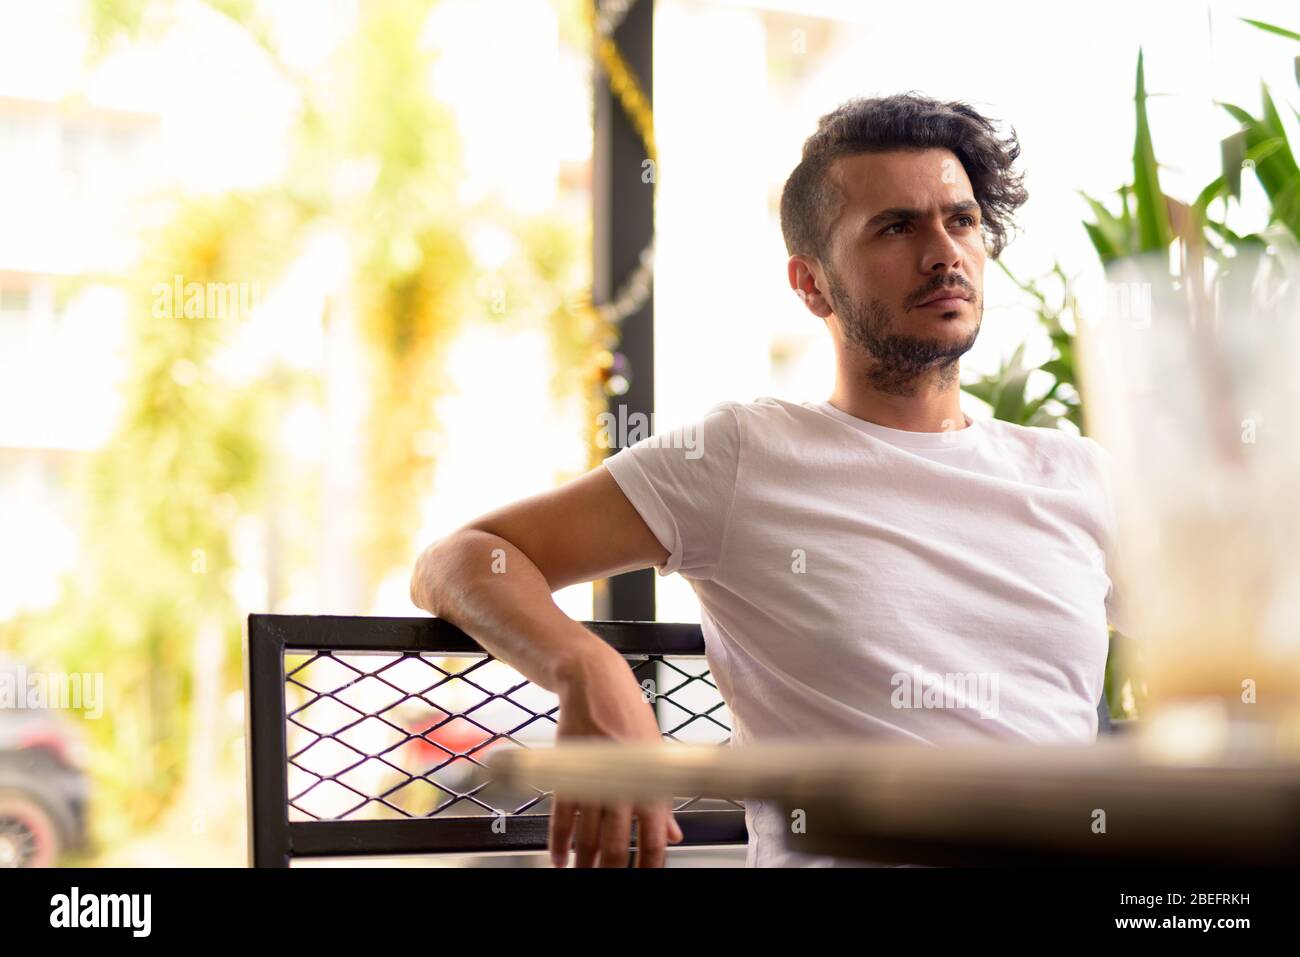 Handsome Turkish man with curly hair relaxing at the coffee shop Stock Photo